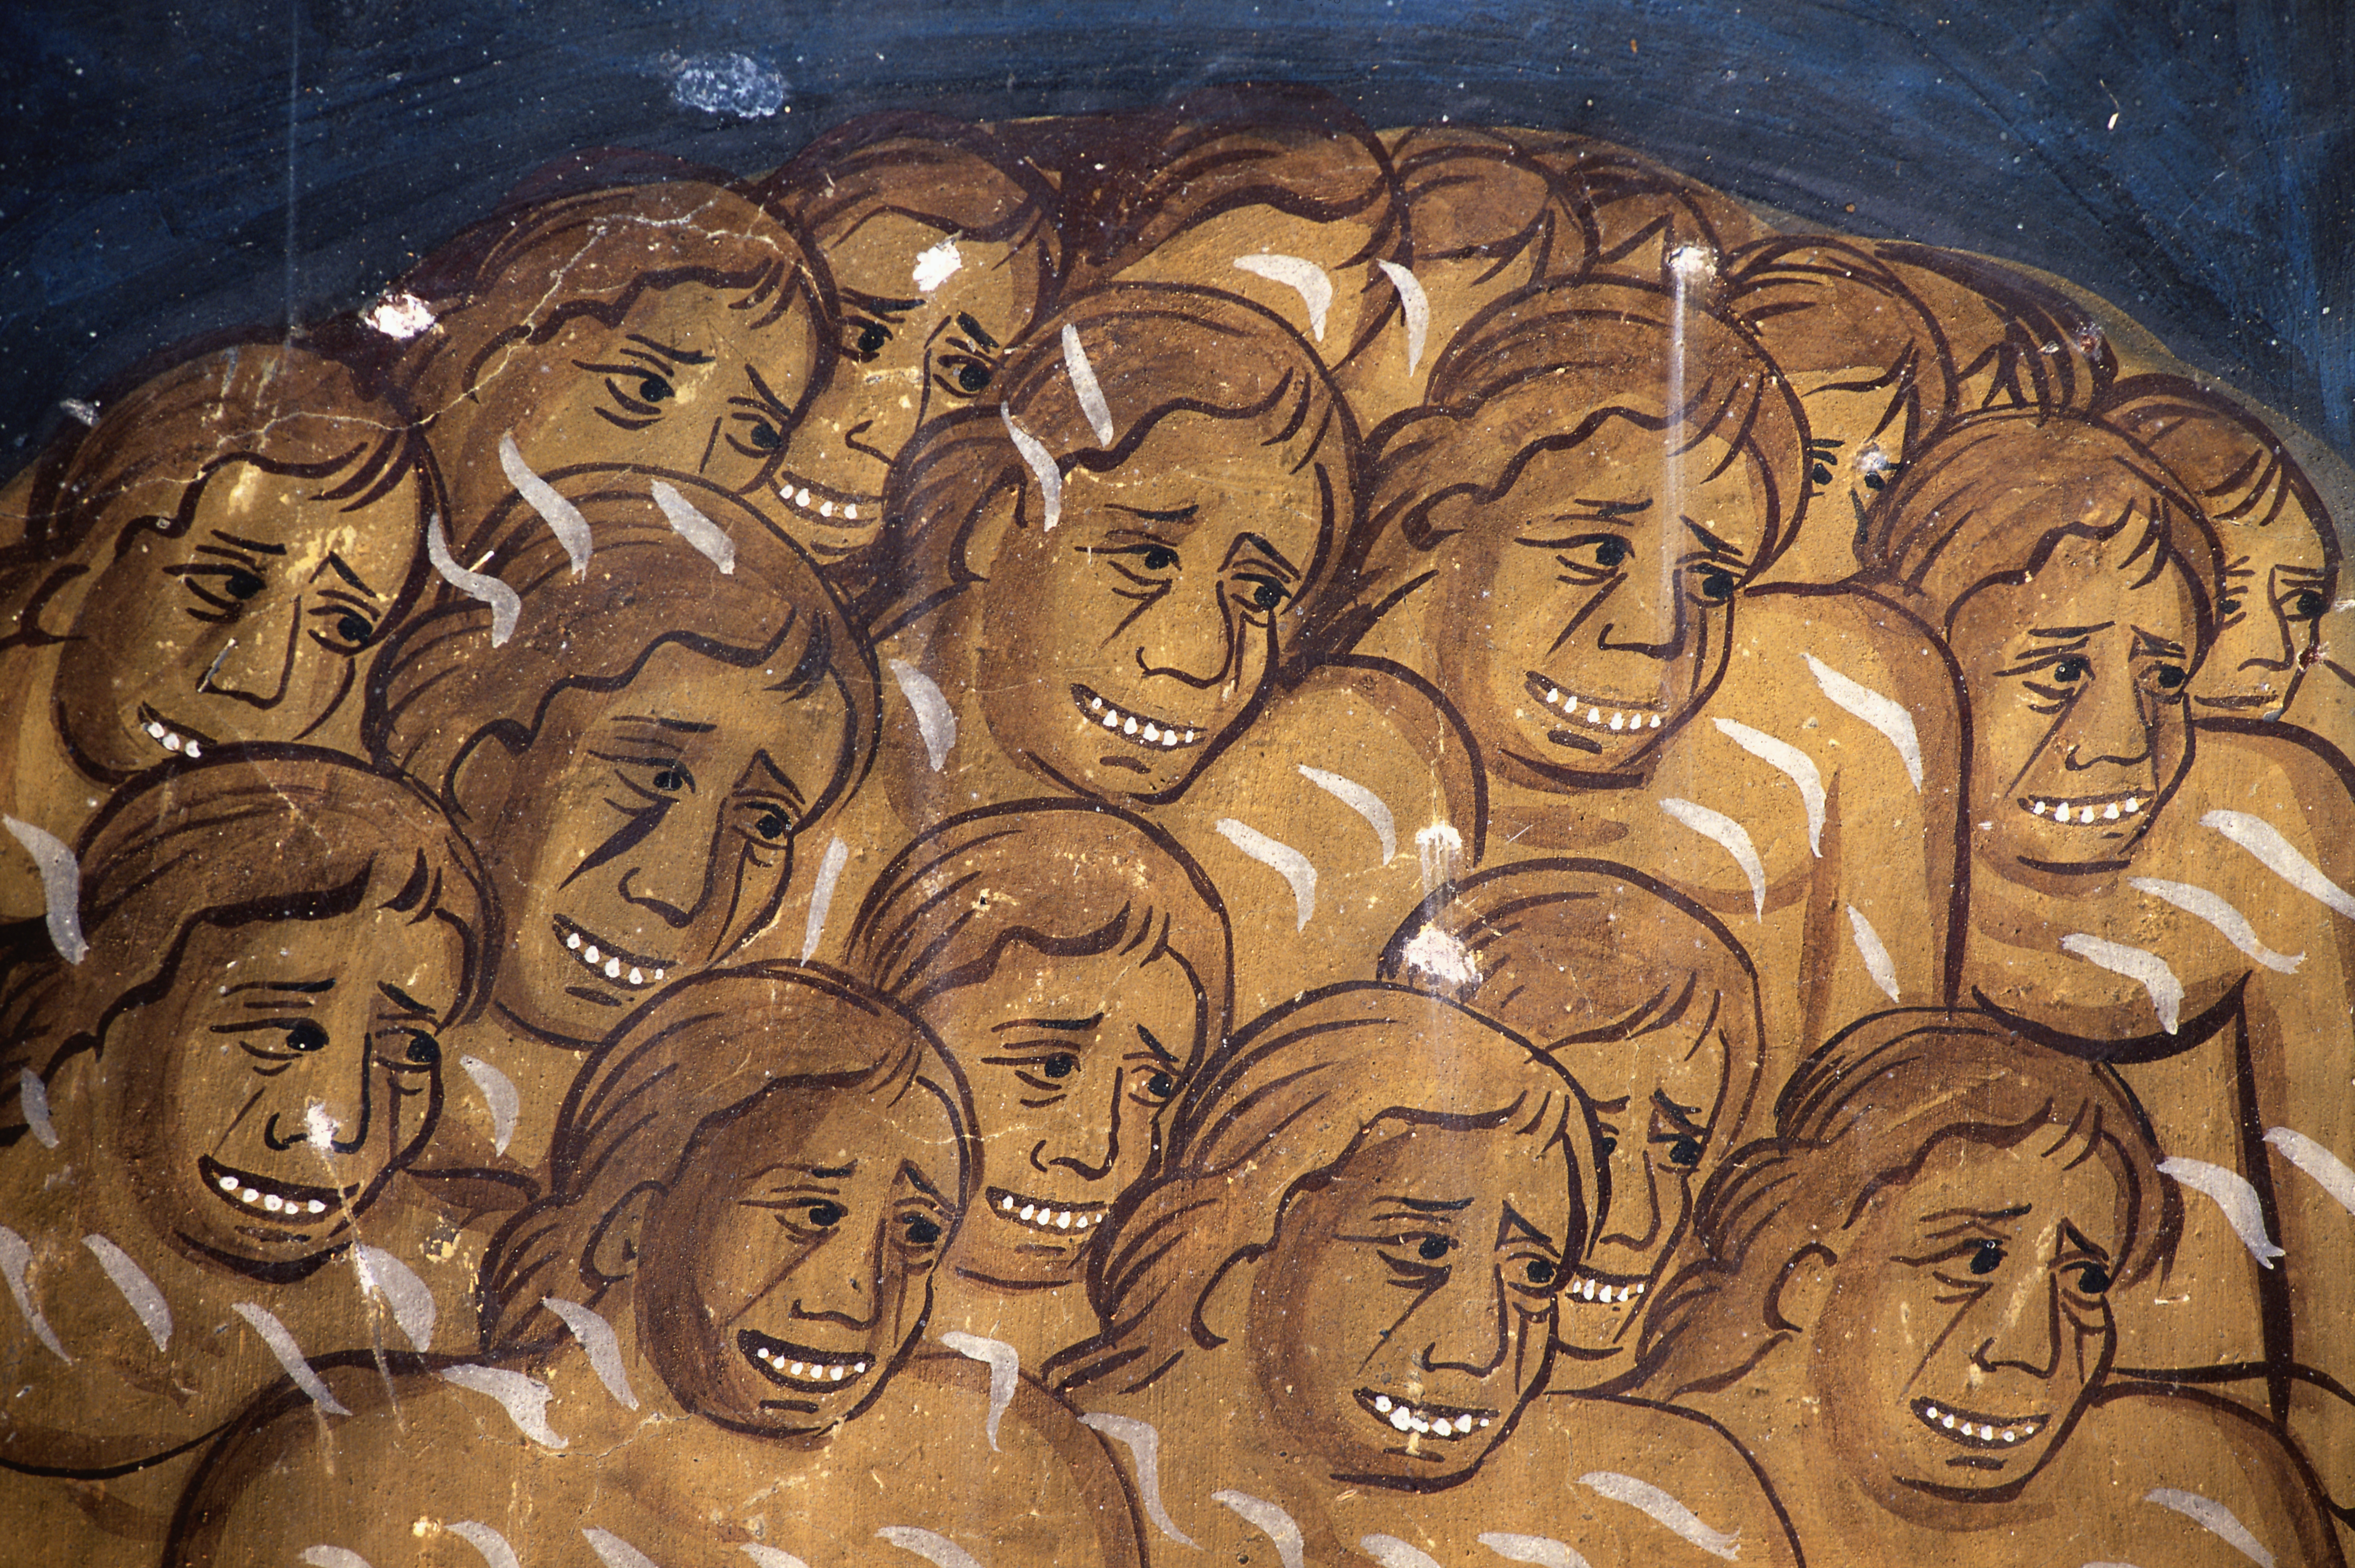 A creepy Medieval pictograph of smiling men.